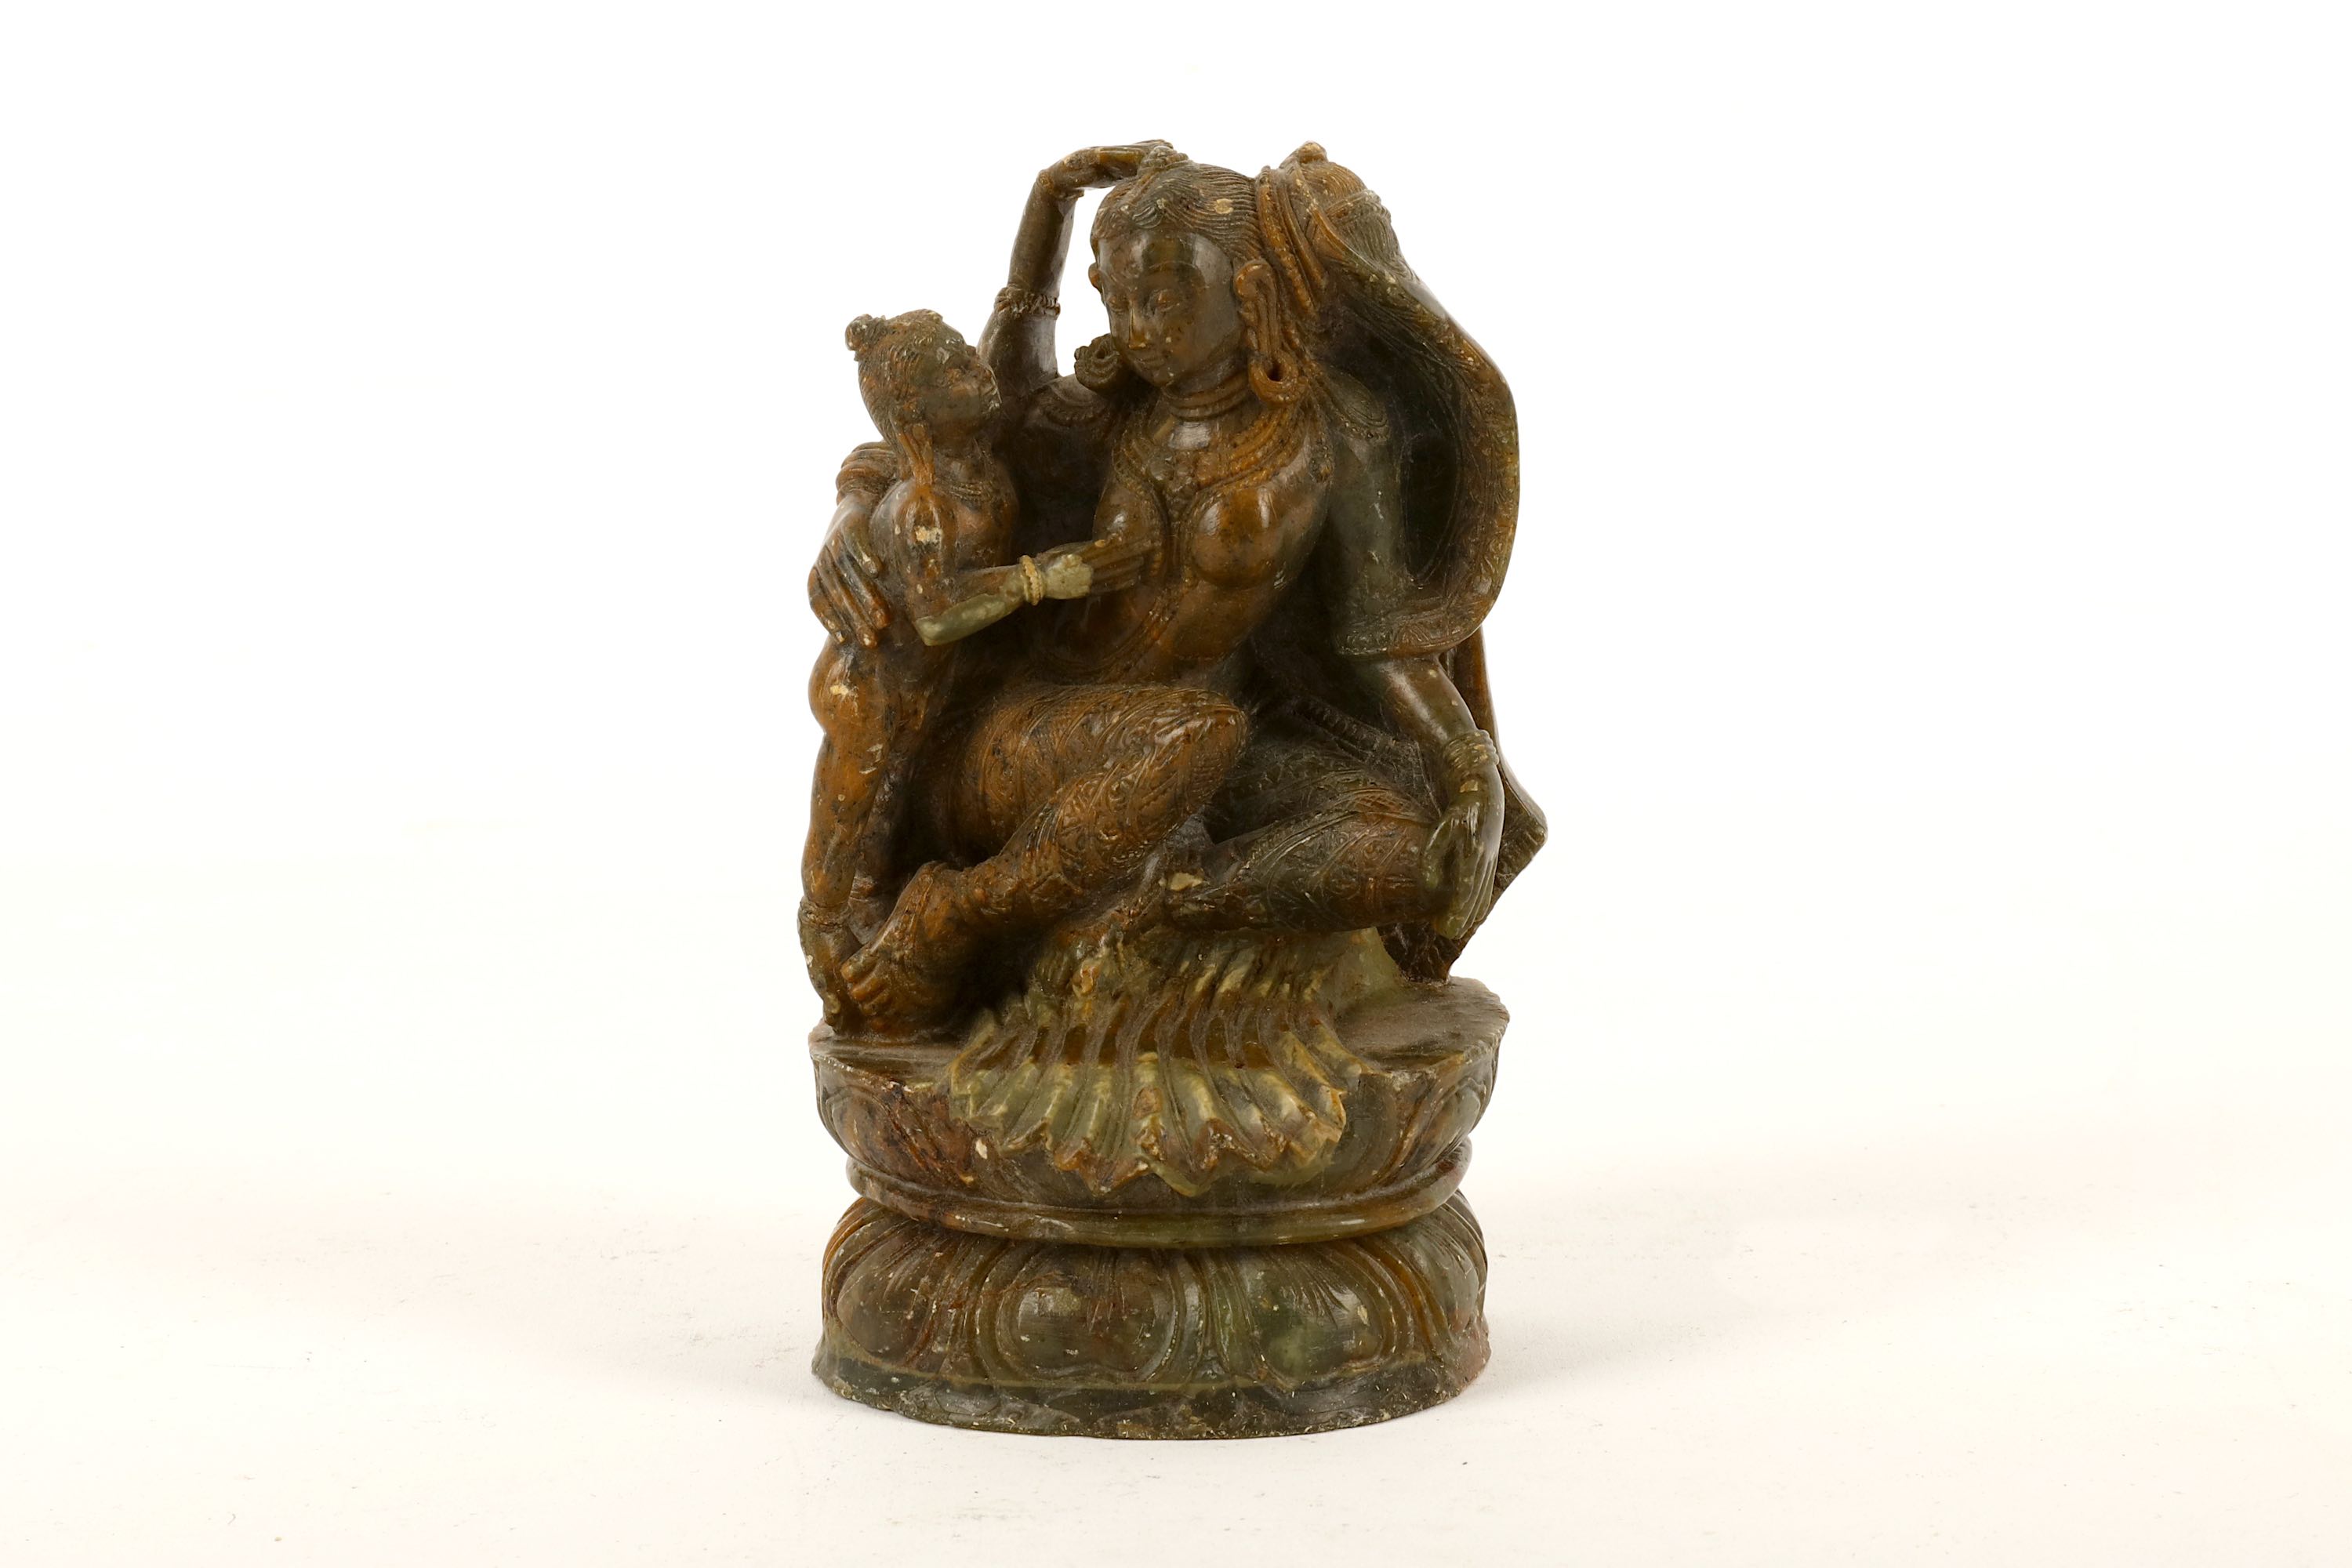 An Indian soapstone carving of a figurative group, depicting with a female figure sitting on a lotus